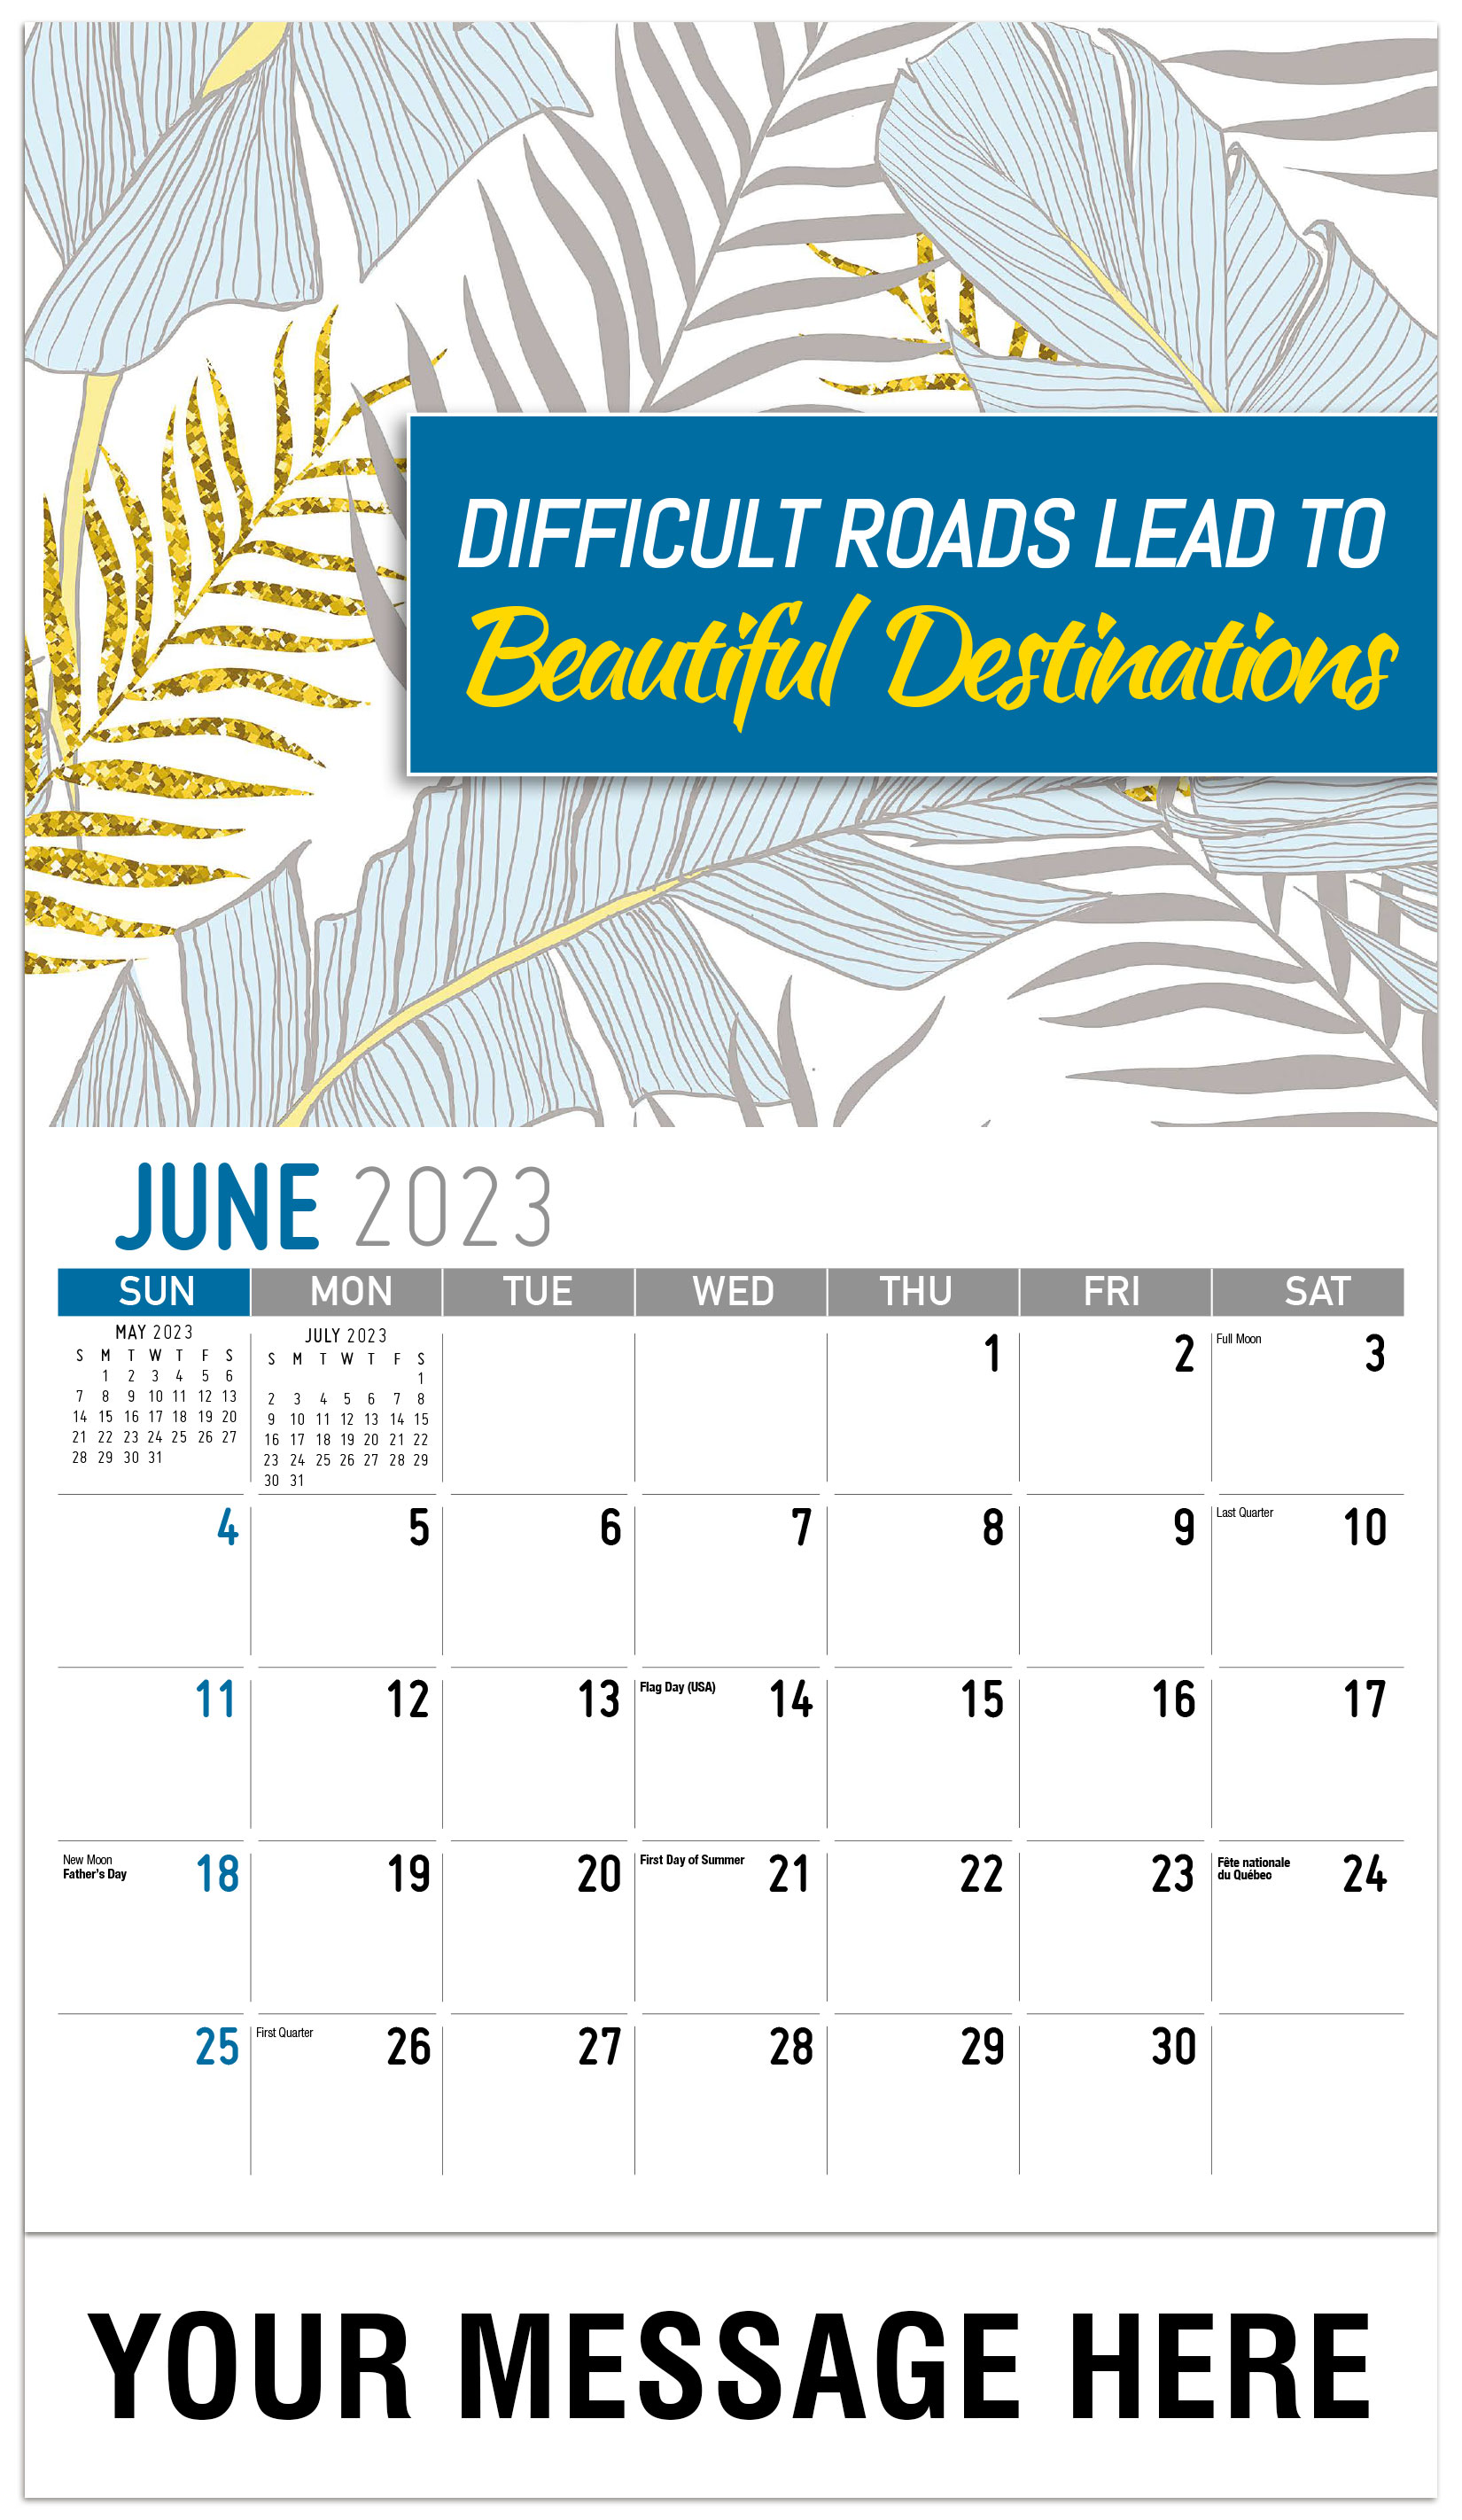 Difficult Roads Lead To 
Beautiful Destinations - June - Arts and Thoughts 2023 Promotional Calendar